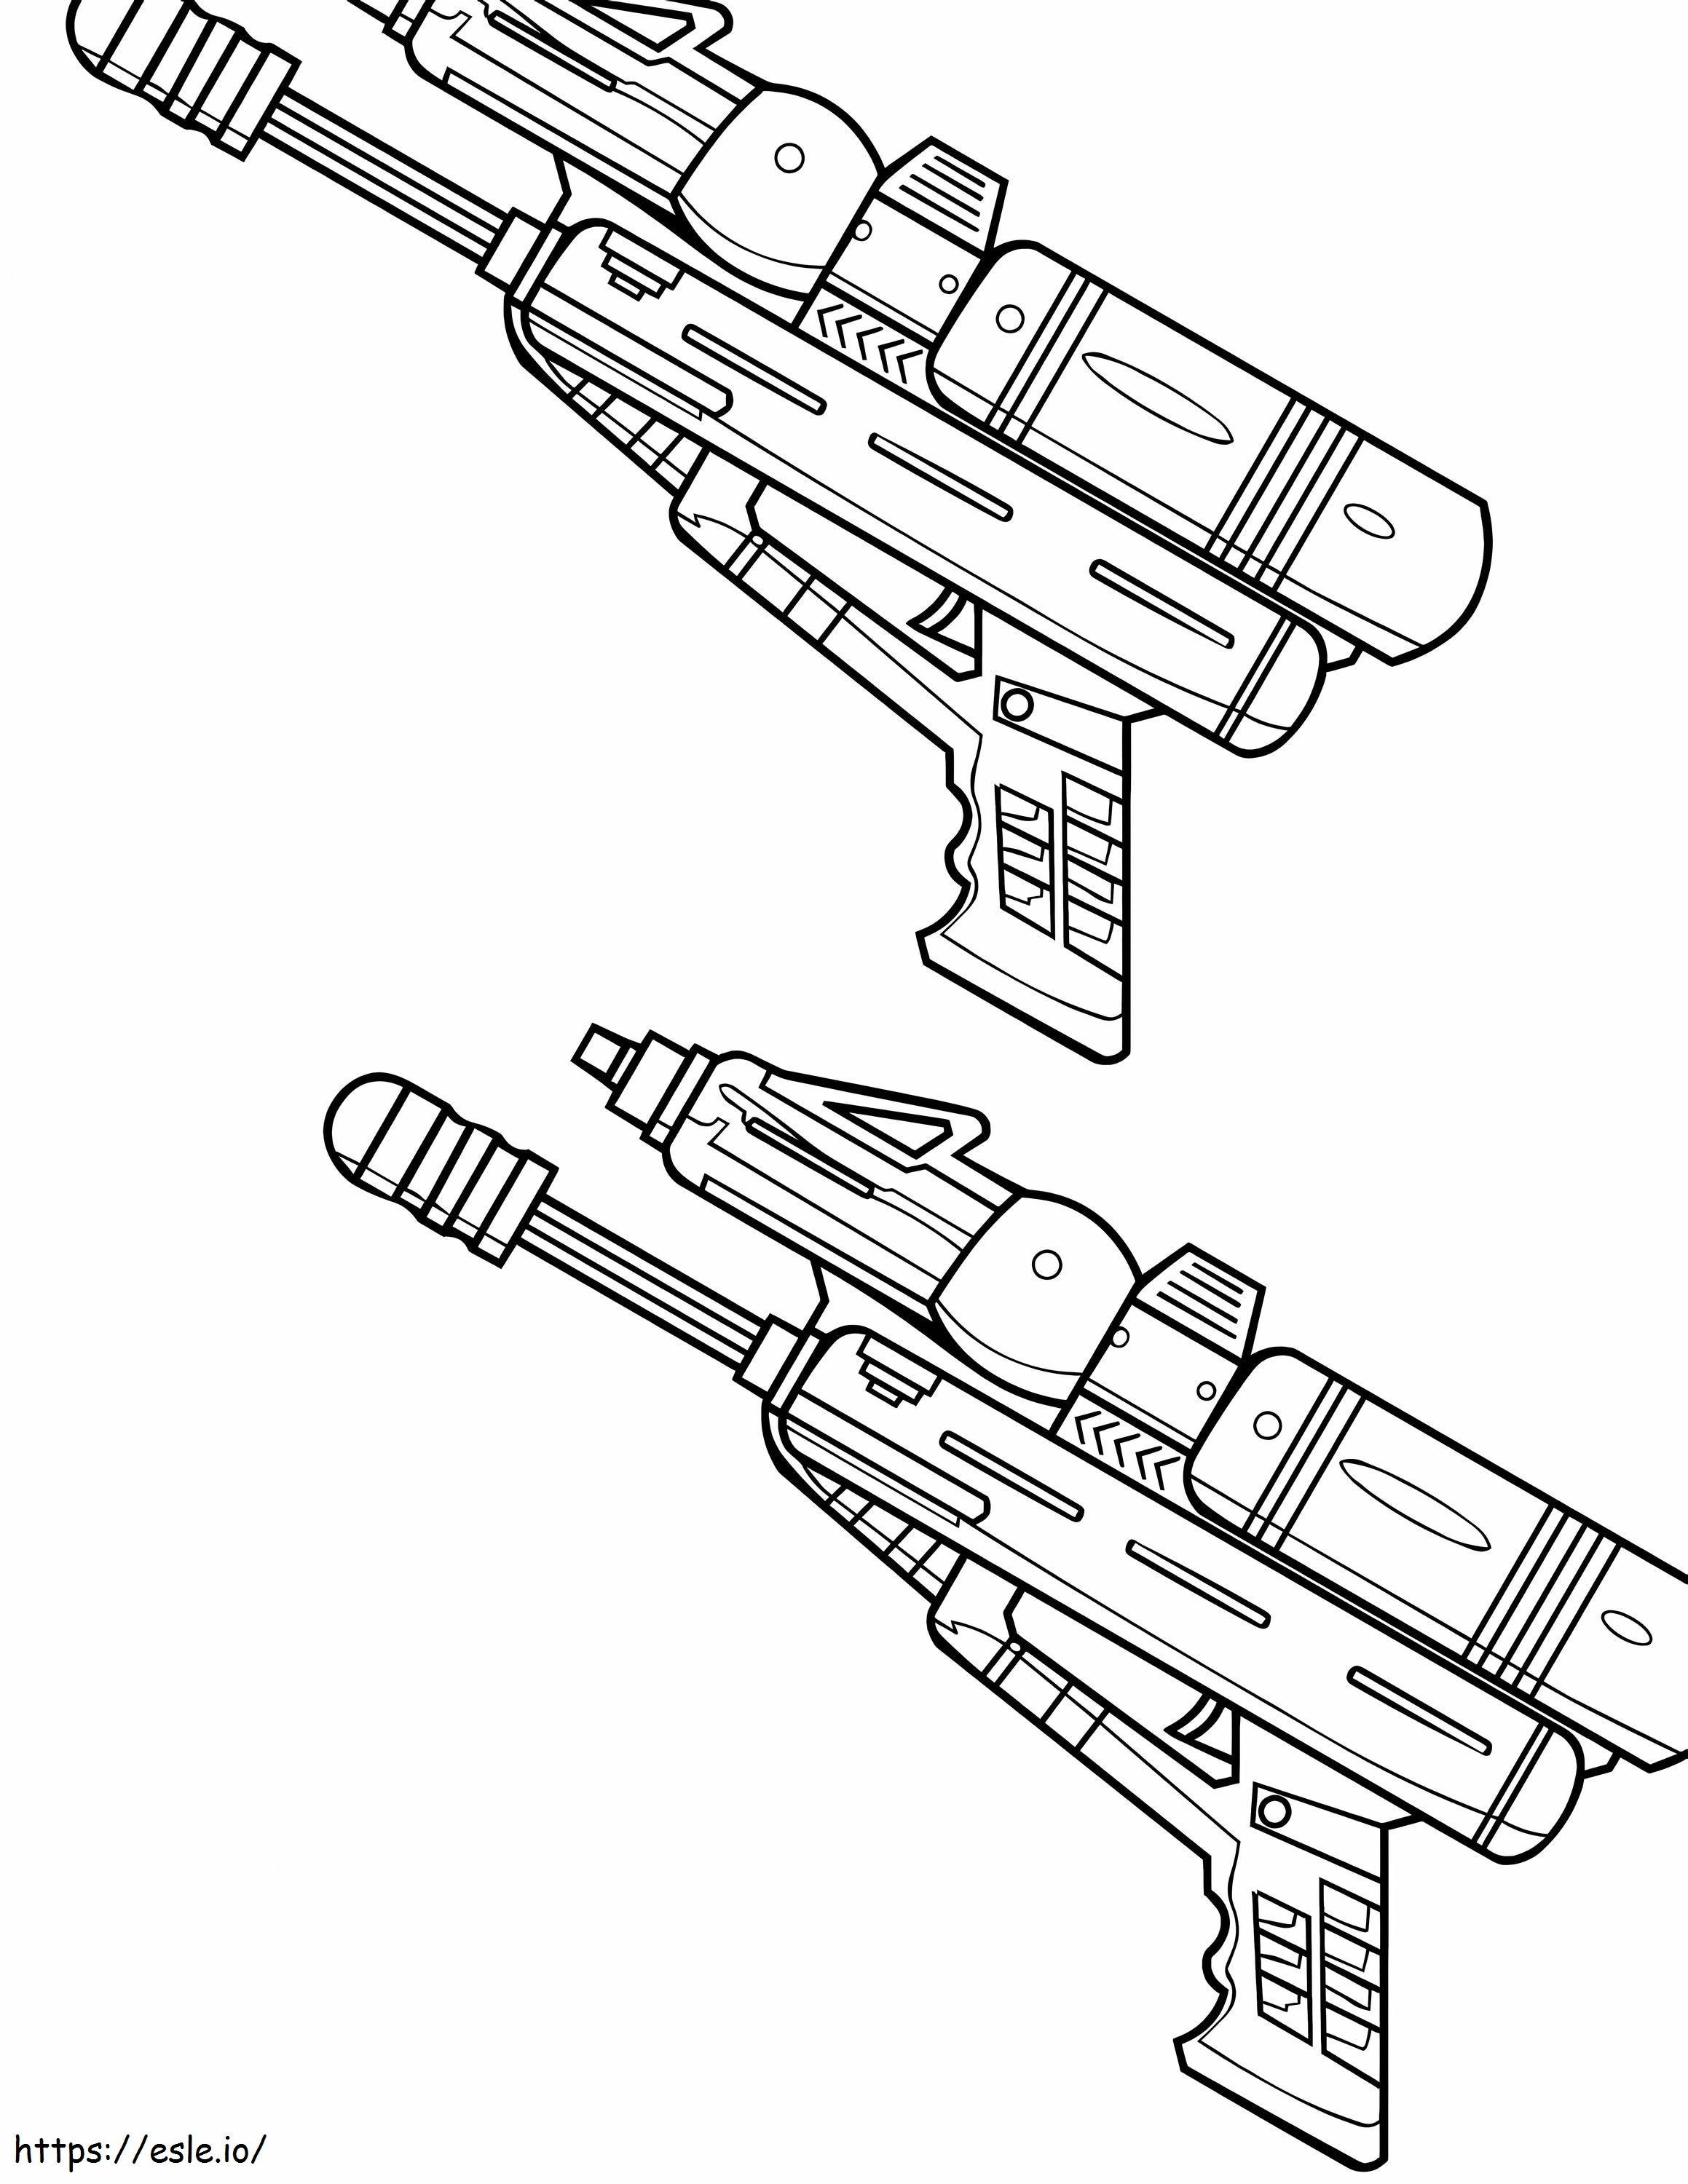 Two Laser Guns coloring page